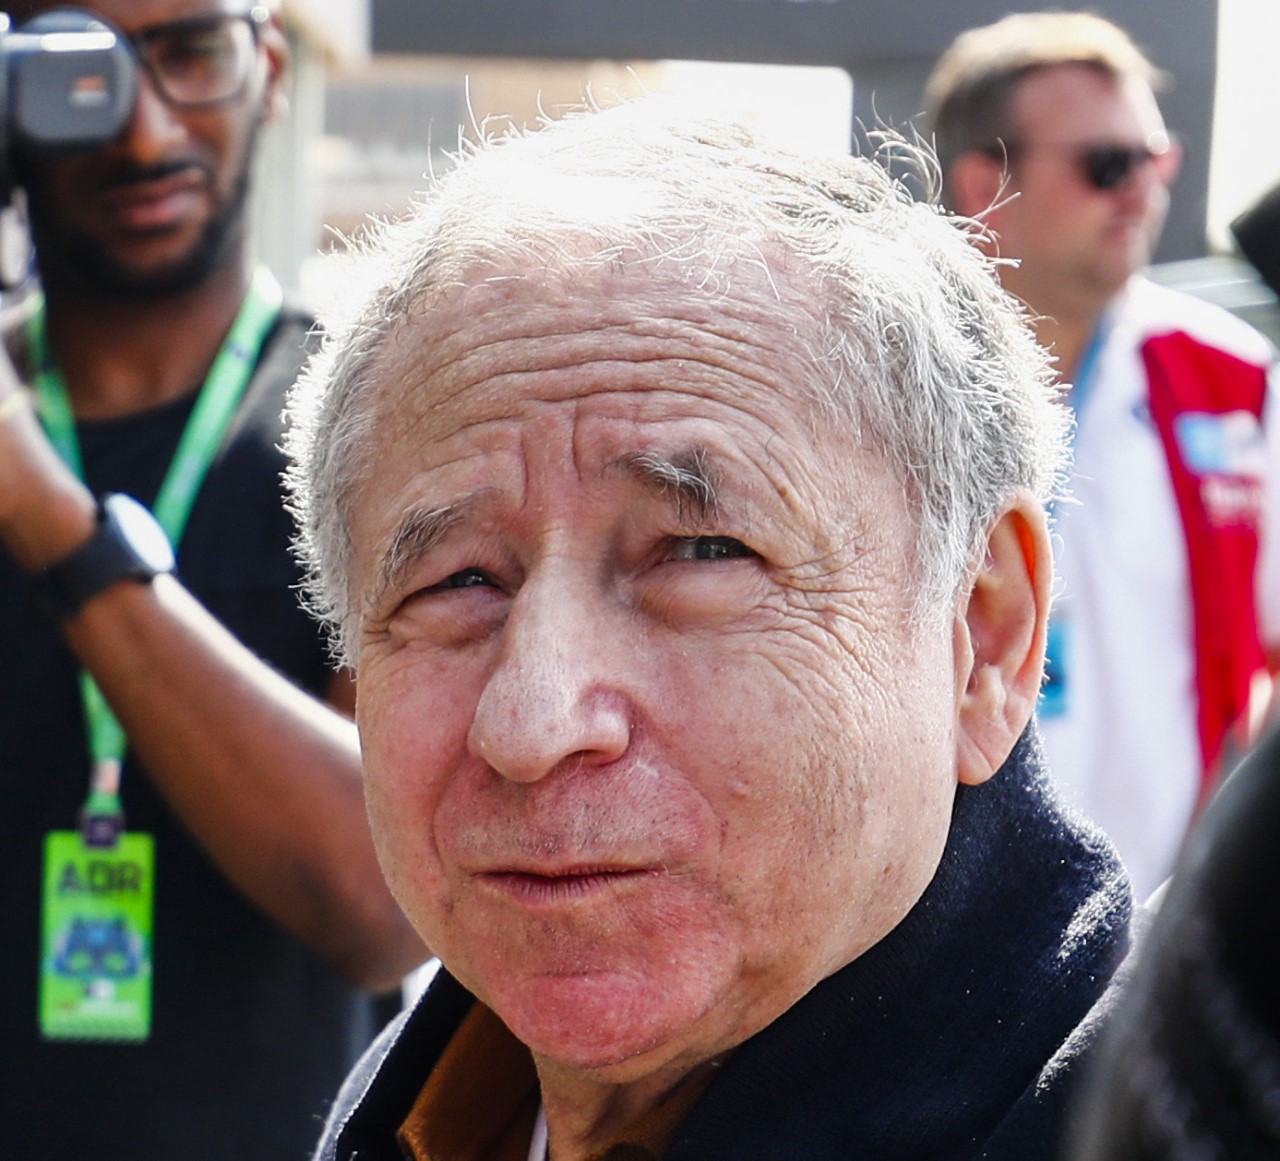 Jean Todt says stop moaning about a long F1 calendar and count your blessings to be in F1